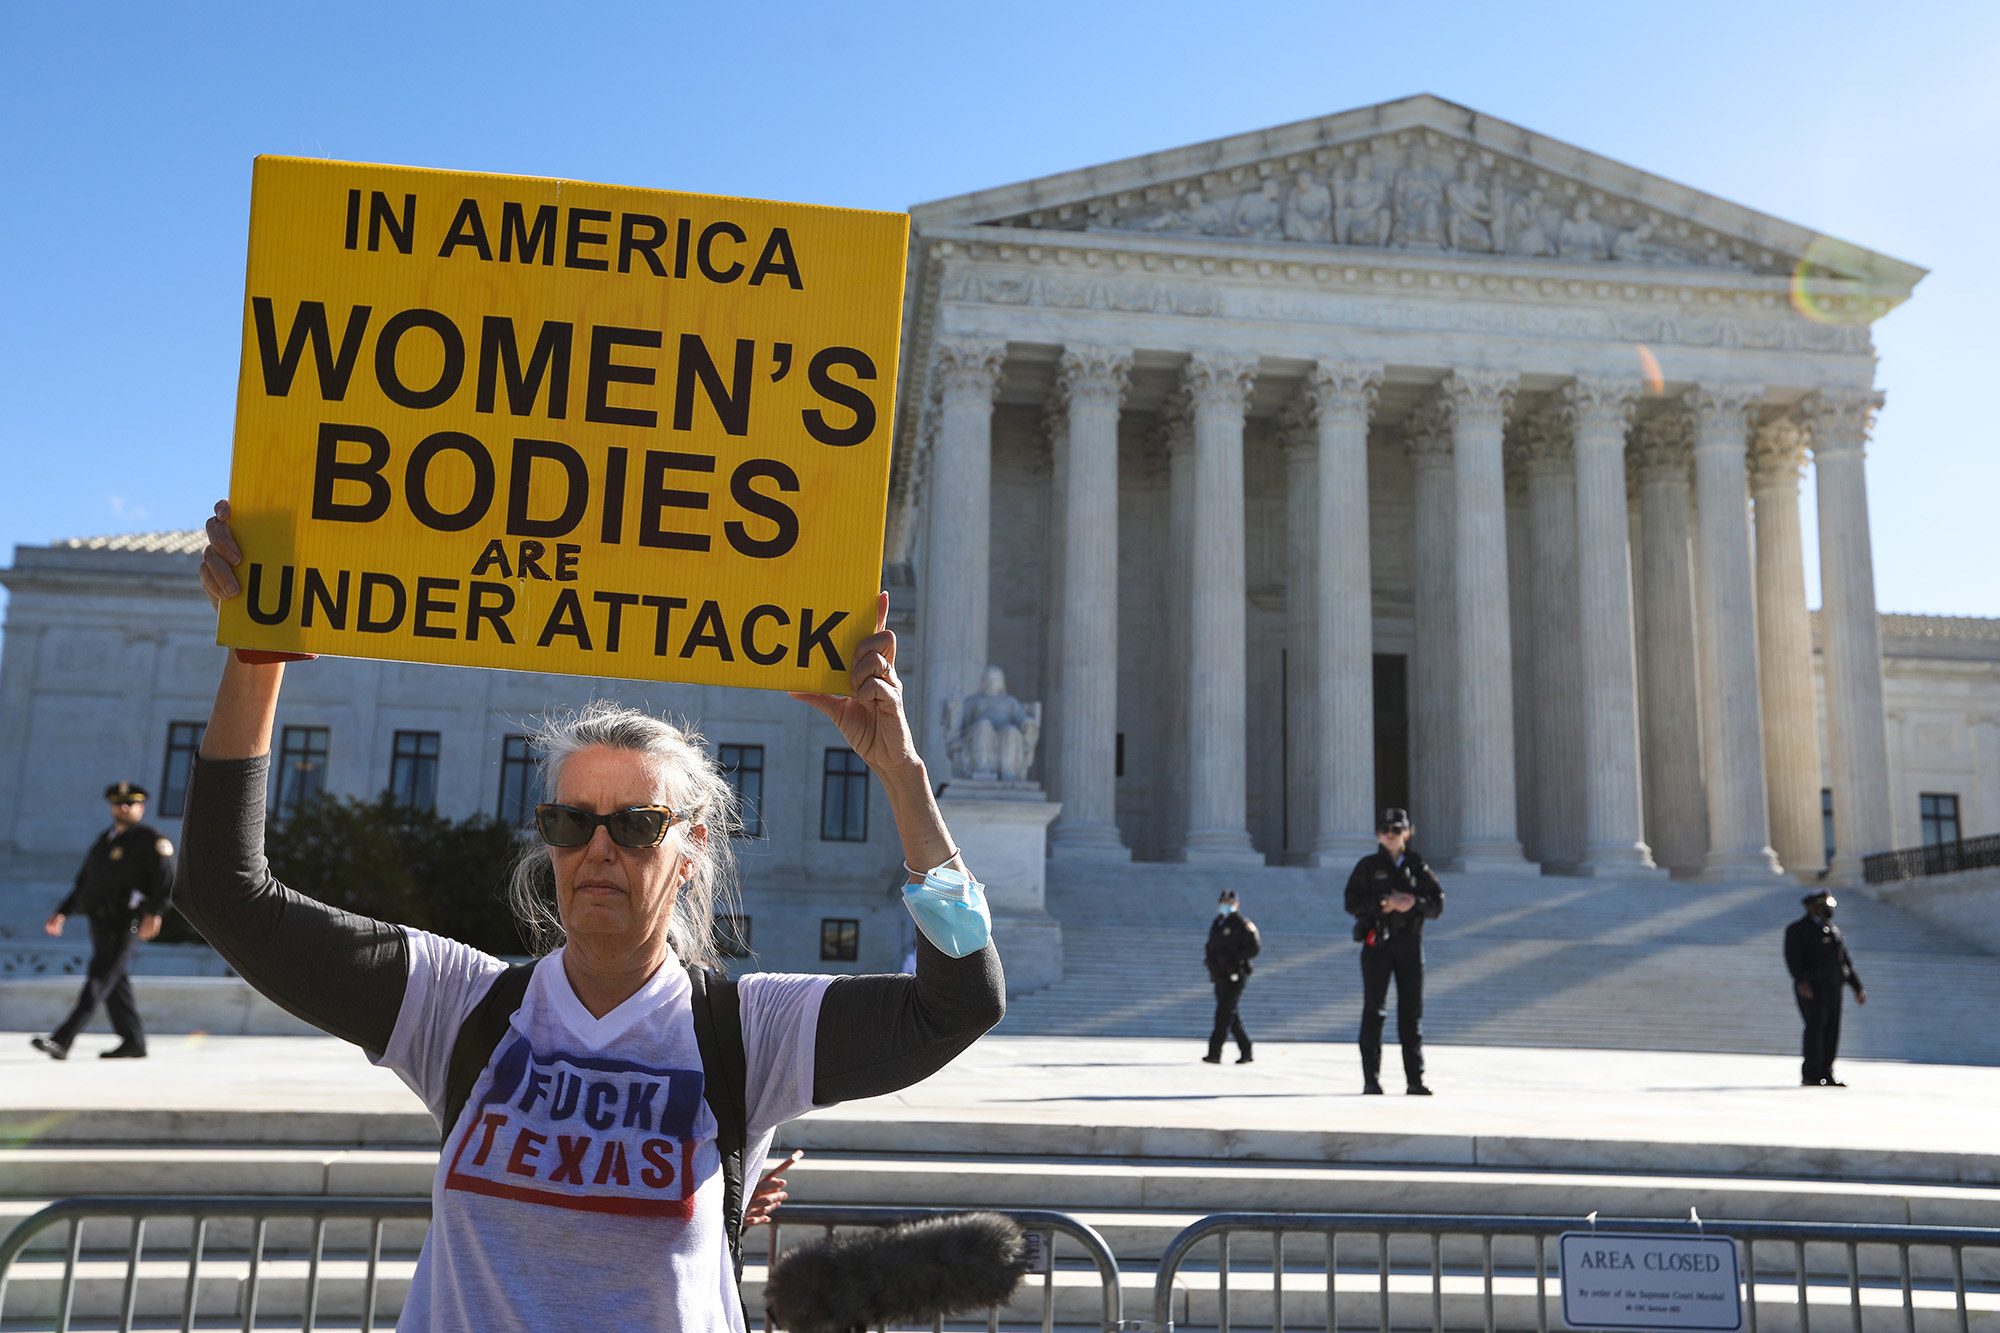 A demonstrator wearing a shirt that says &quot;fuck Texas&quot; holds up a sign reading &quot;in America women&#x27;s bodies are under attack&quot;